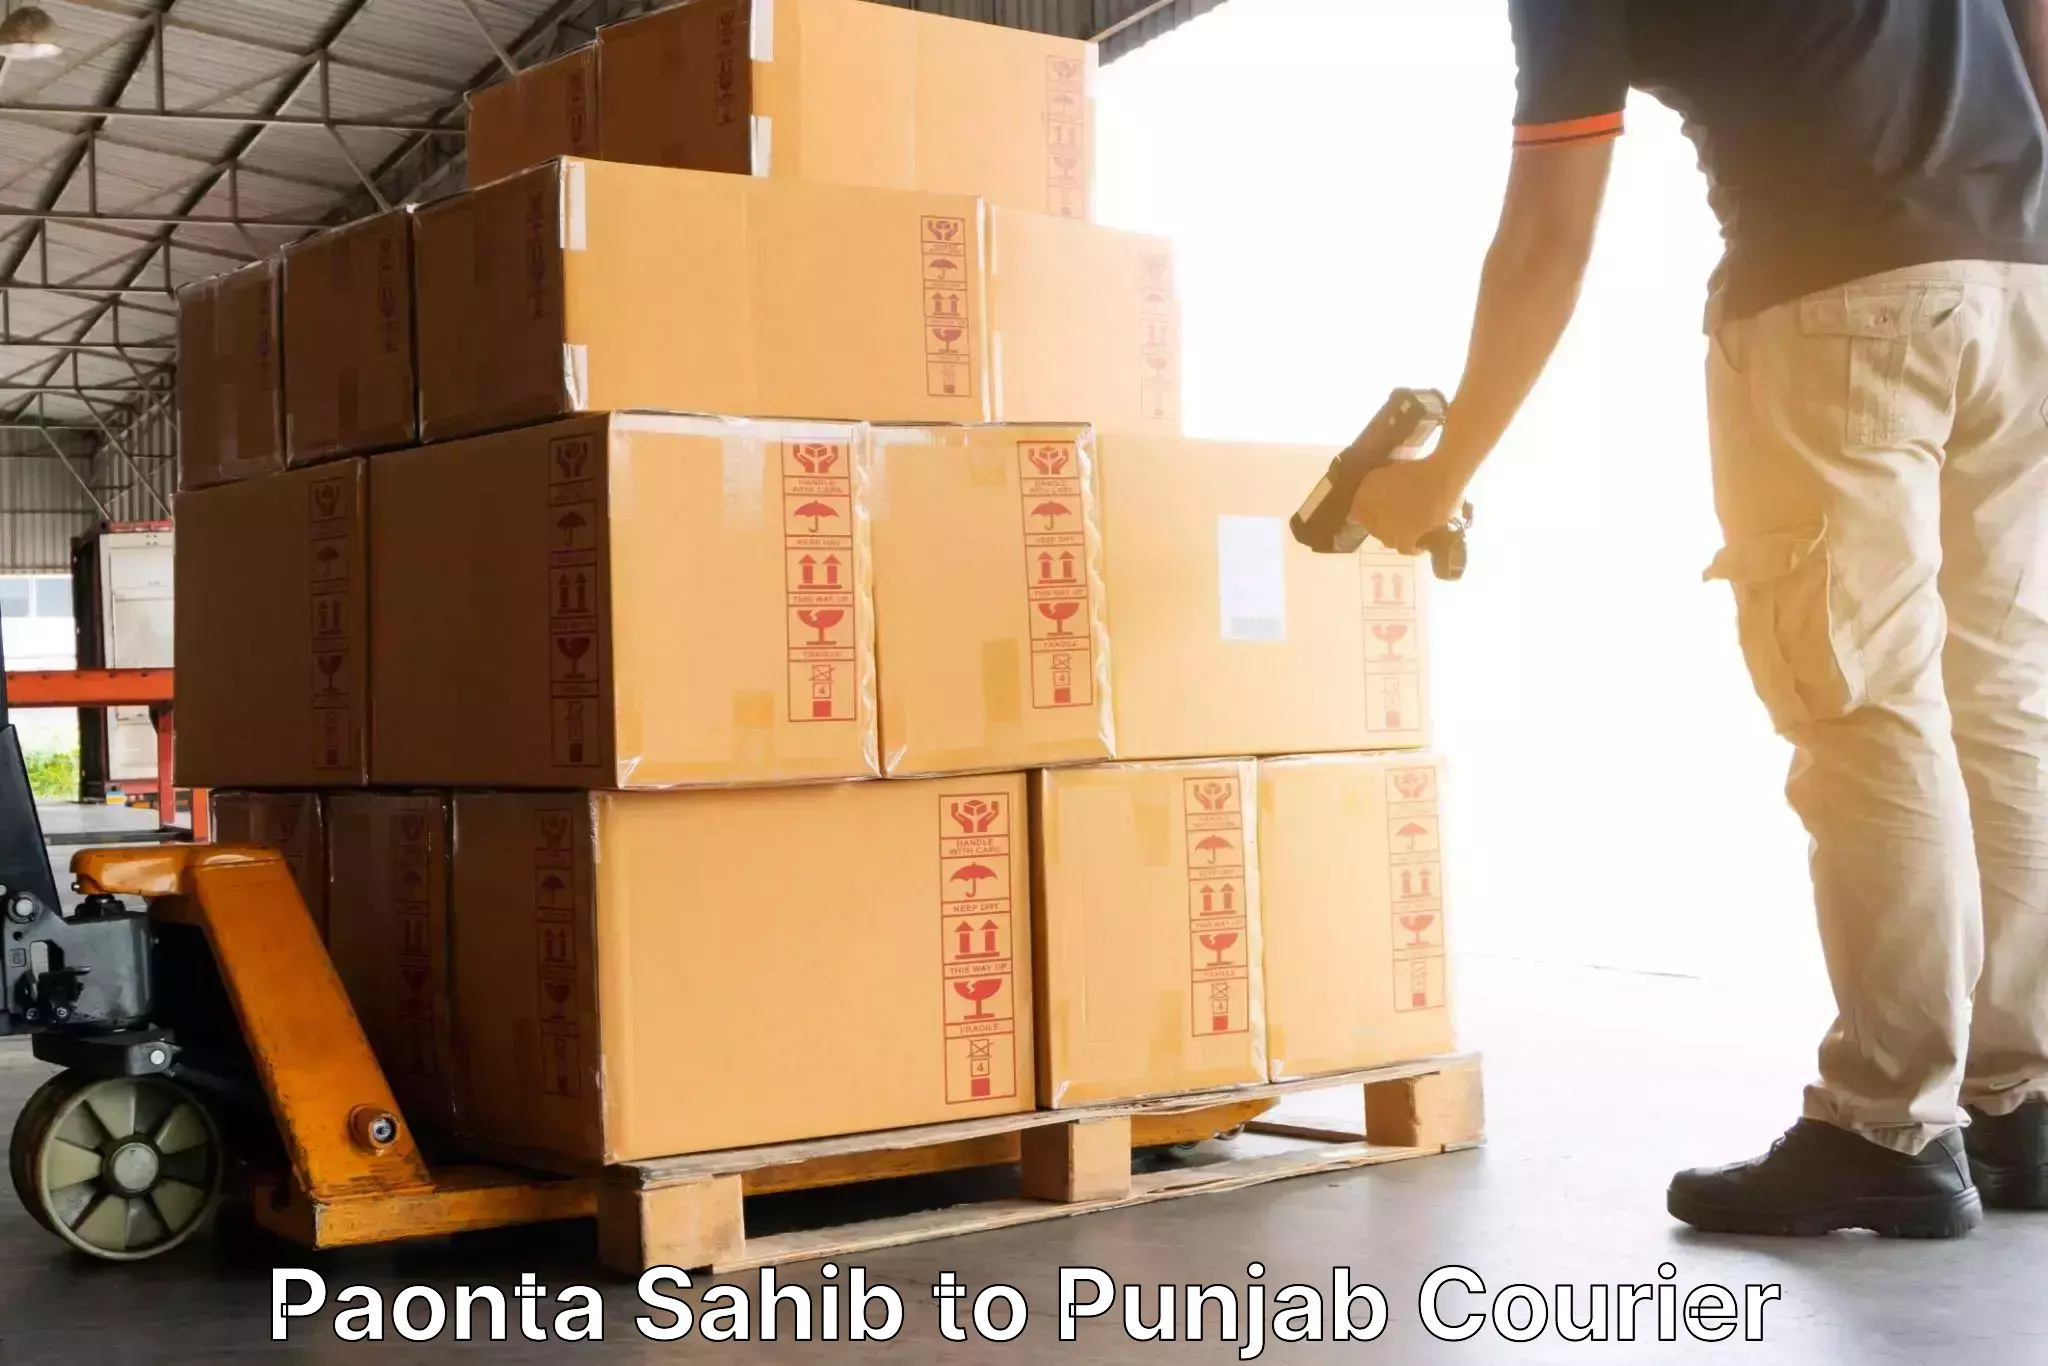 Flexible delivery schedules Paonta Sahib to Firozpur